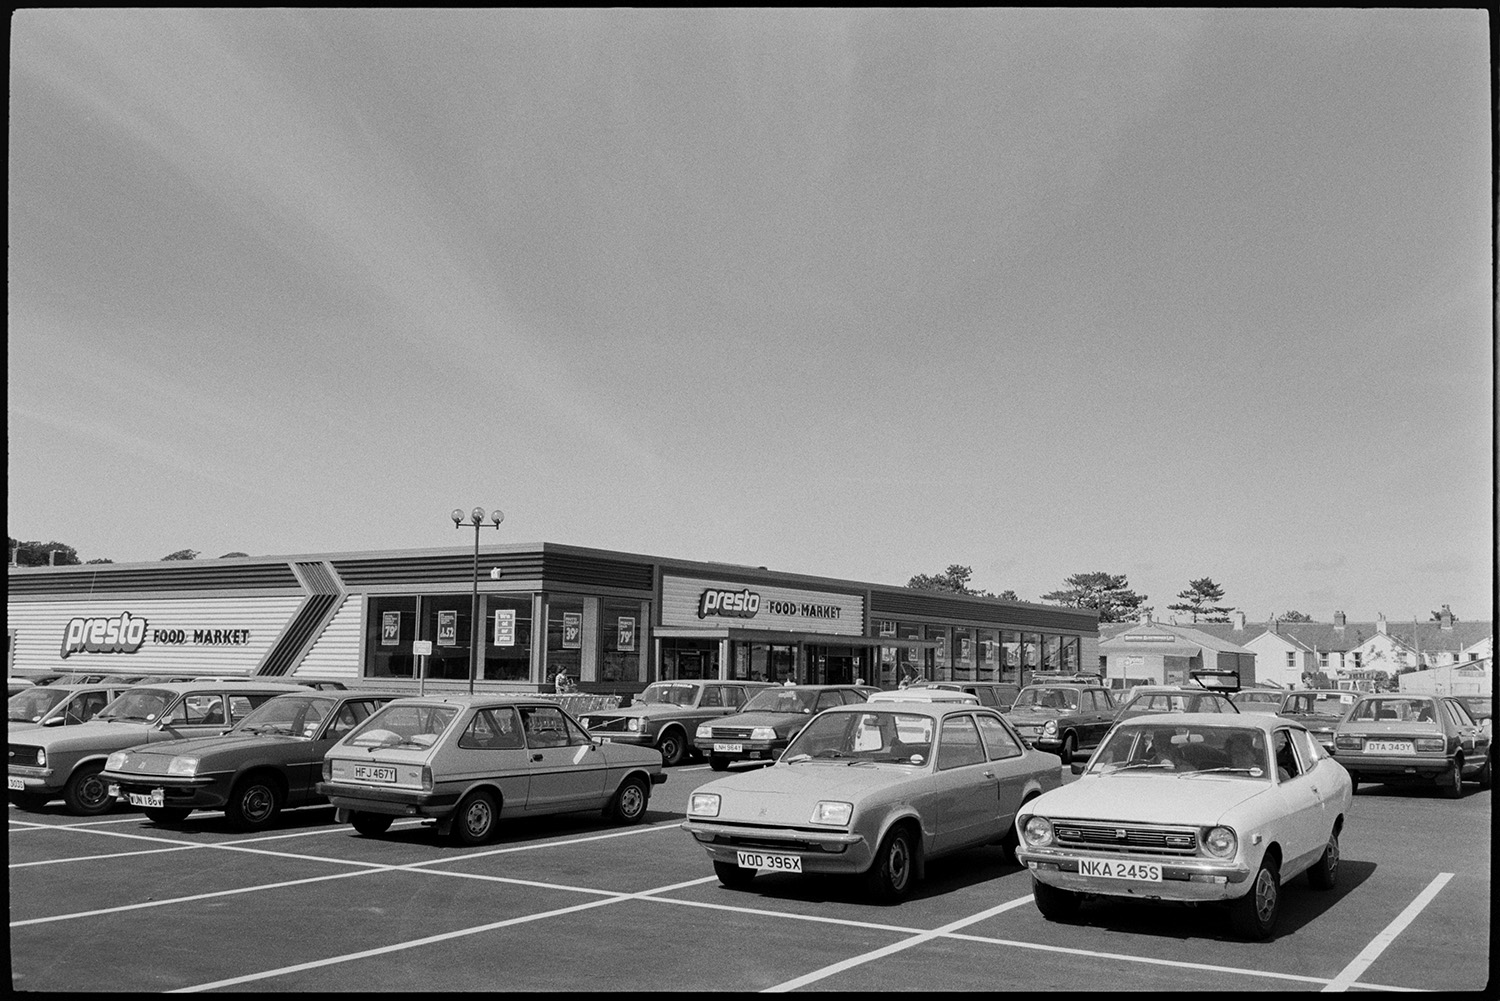 Interior of supermarket, people shopping, car park. Fruit, cash desk, check out.
[The car park and entrance to Presto Food Market in Bideford.]